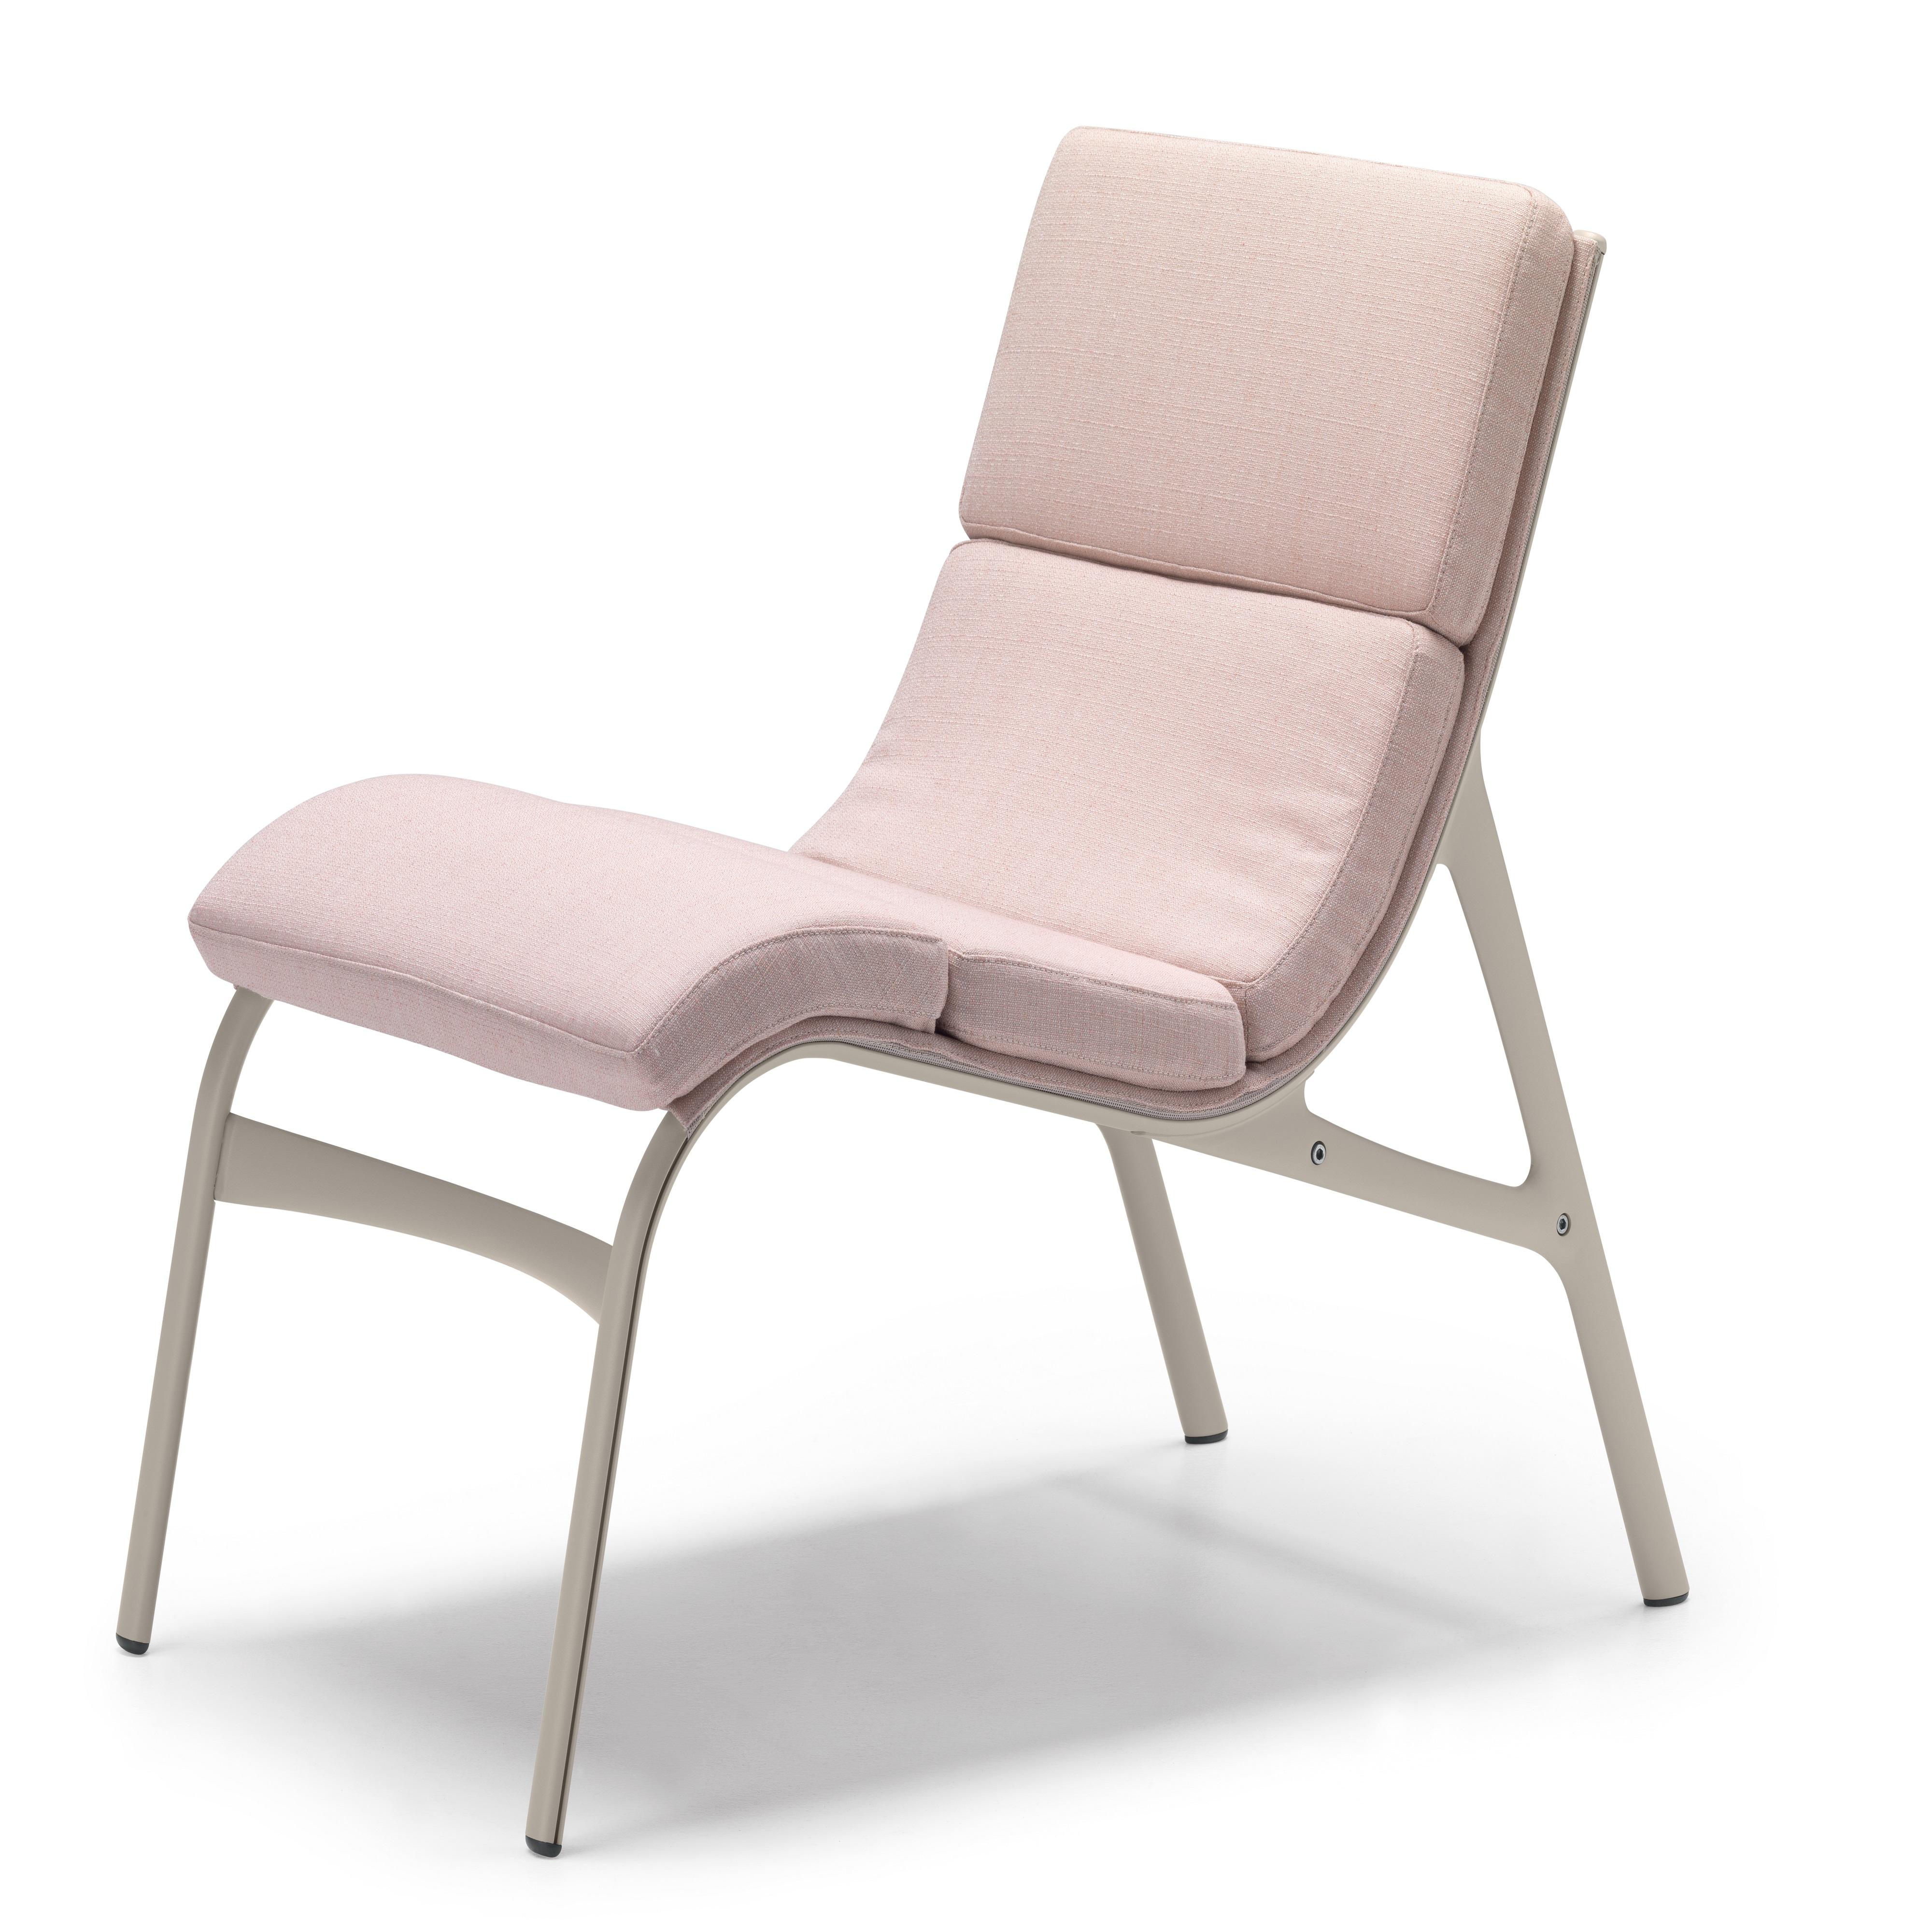 Alias 462 Armframe Soft Chair in Sand Mesh and Pink Seat with Lacquered Frame by Alberto Meda

Easy chair with structure made of extruded aluminium profile and die-cast aluminium elements. Seat and back upholstered with cover in eco-leather Serge